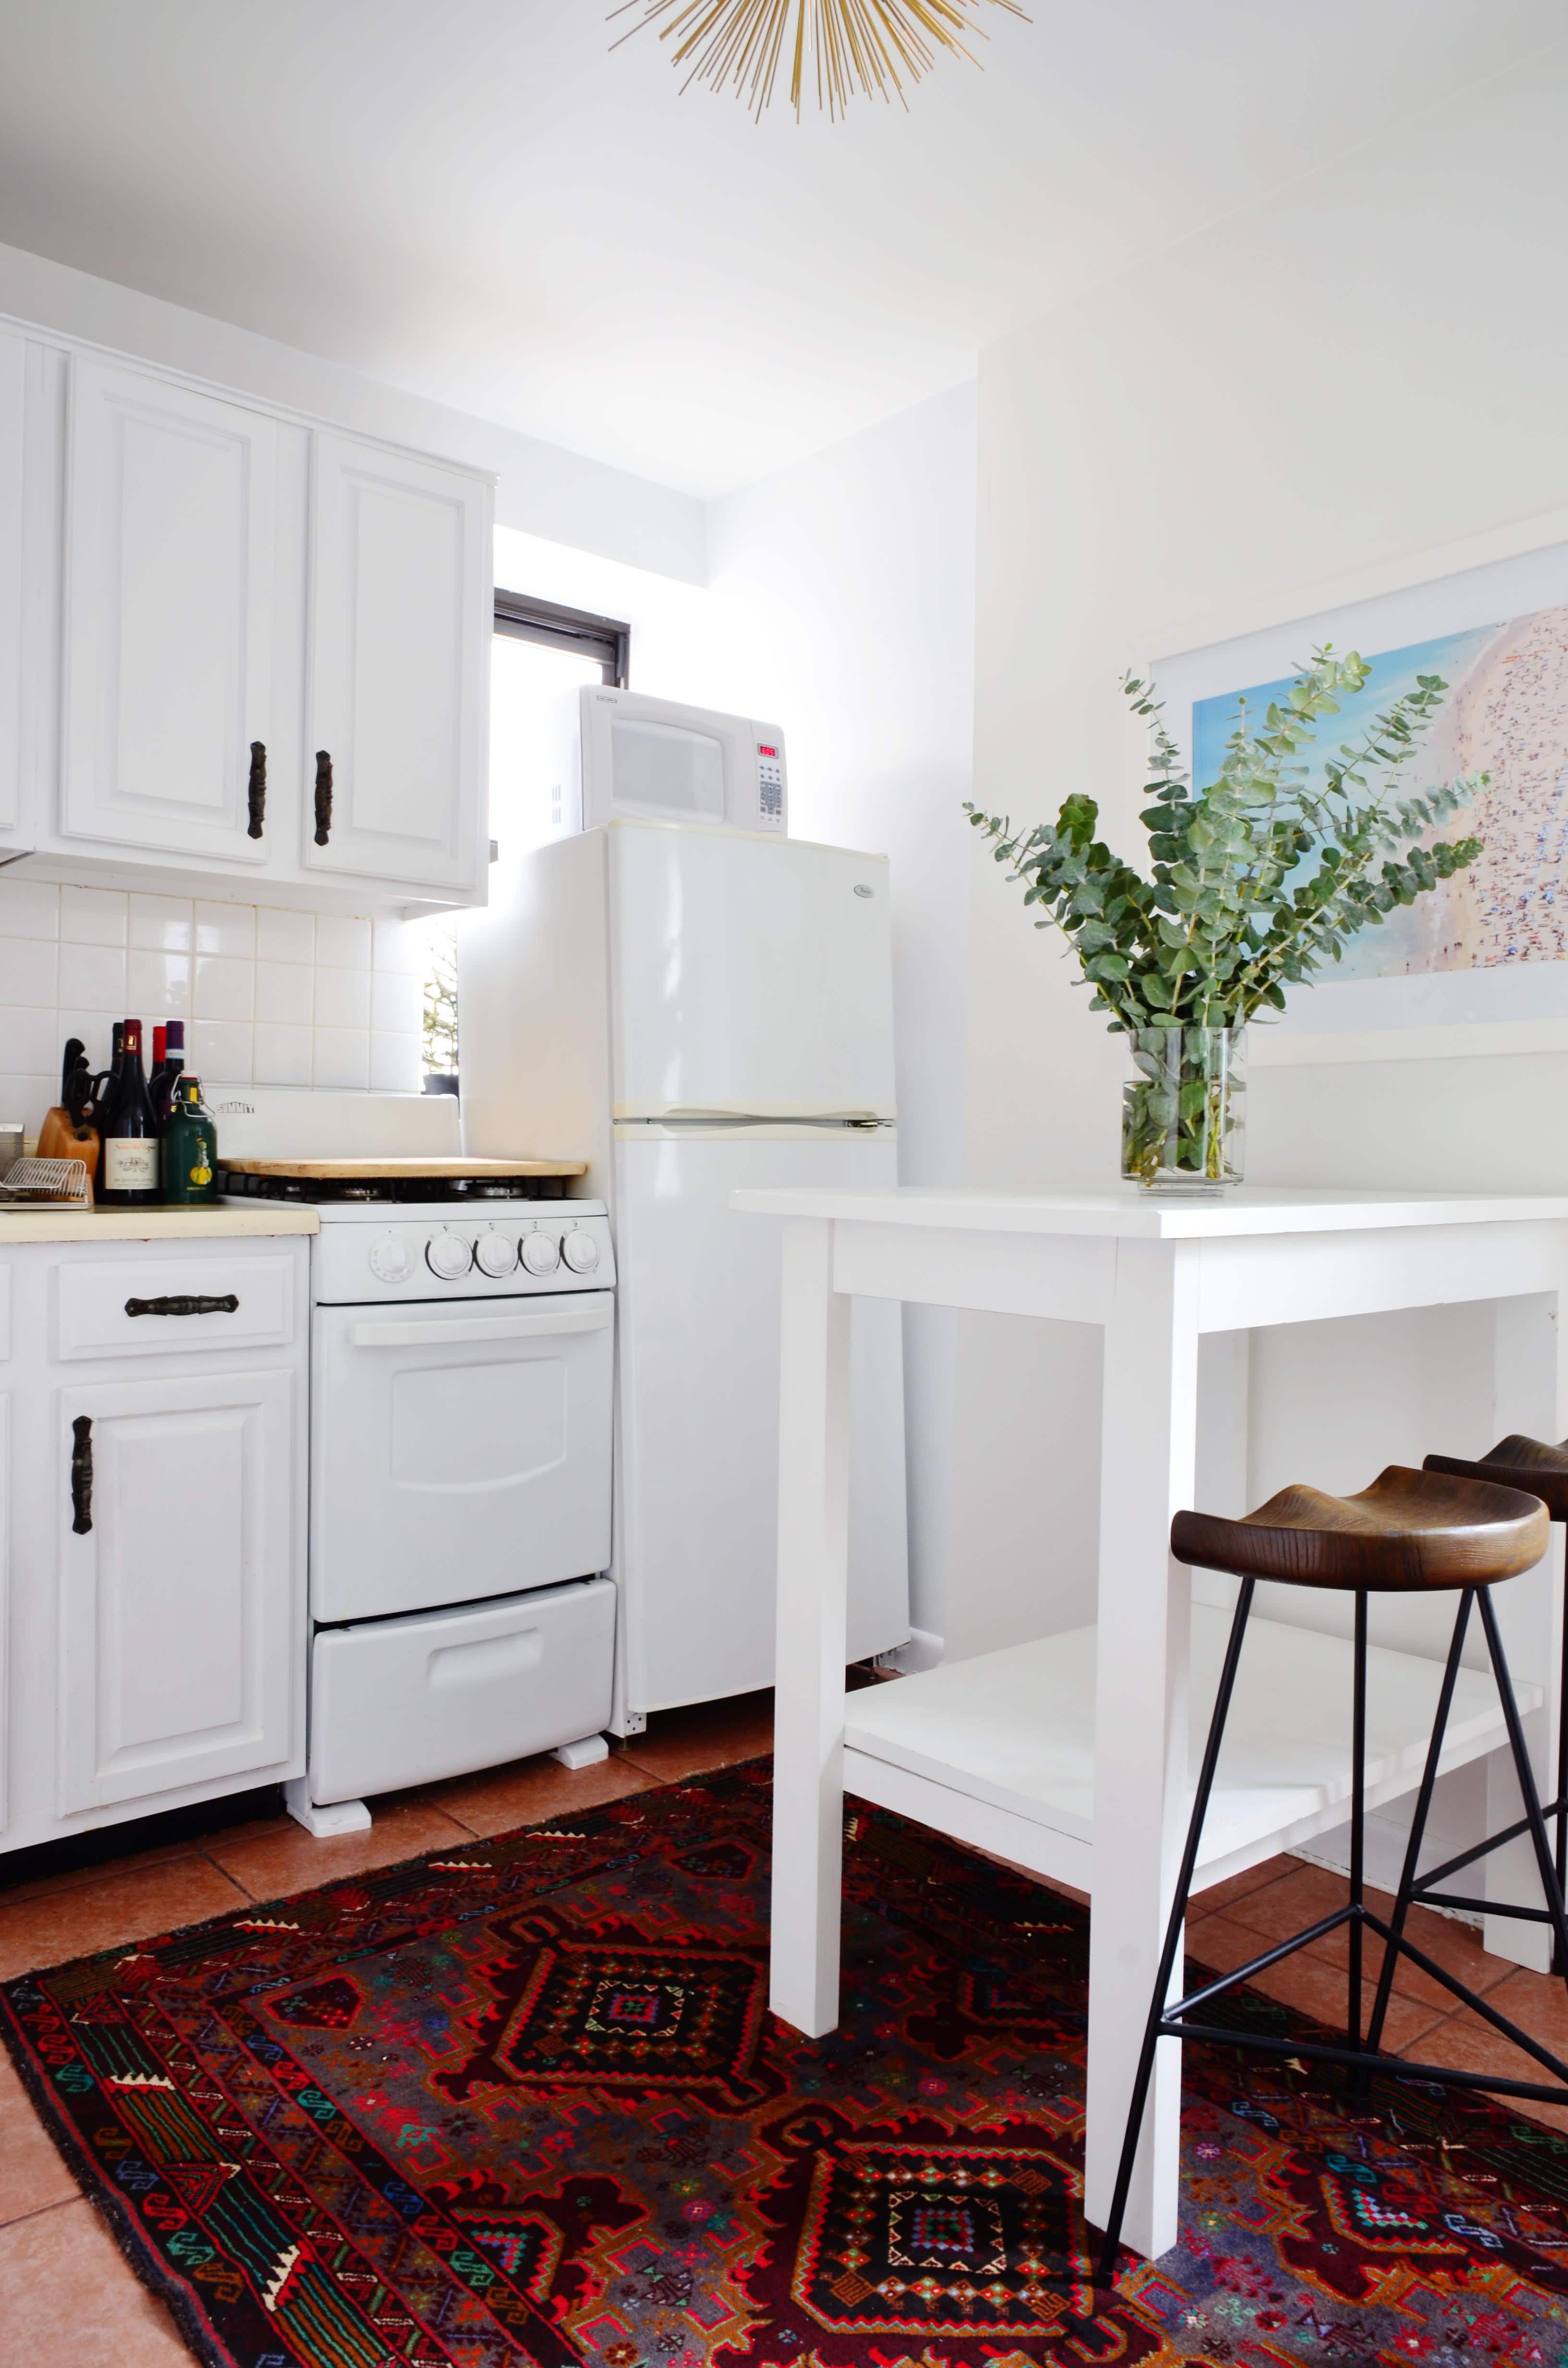 7 Ways Slim Storage Saves the Day — Small Space Solutions  Kitchen remodel  small, Kitchen remodel plans, Small apartment therapy